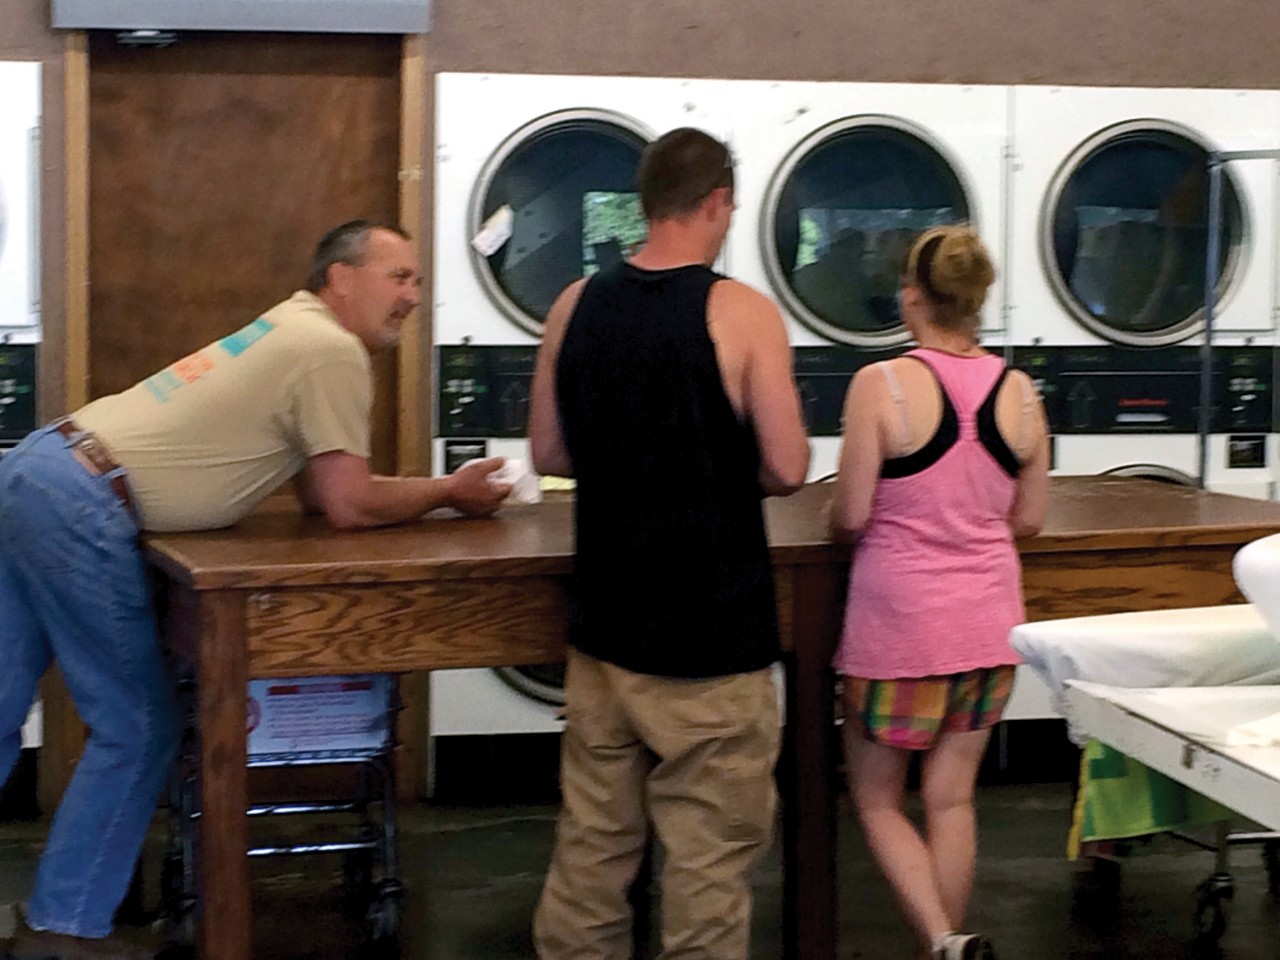 Mark Stansell sharing Christ with prospects in a laundry mat.